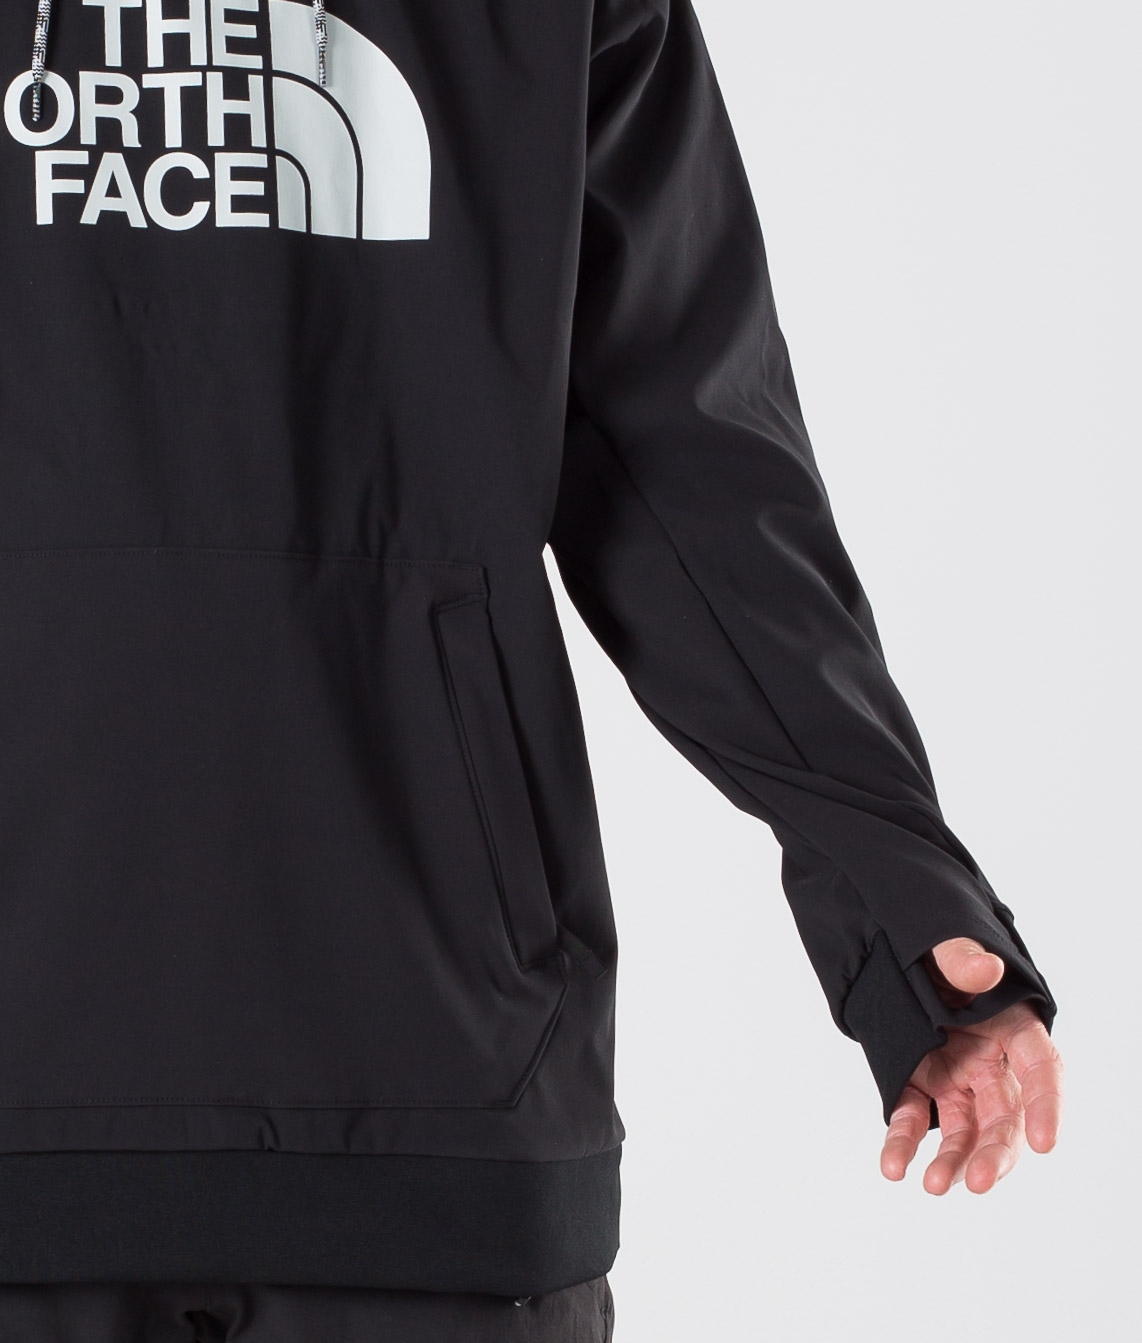 tekno hoodie north face